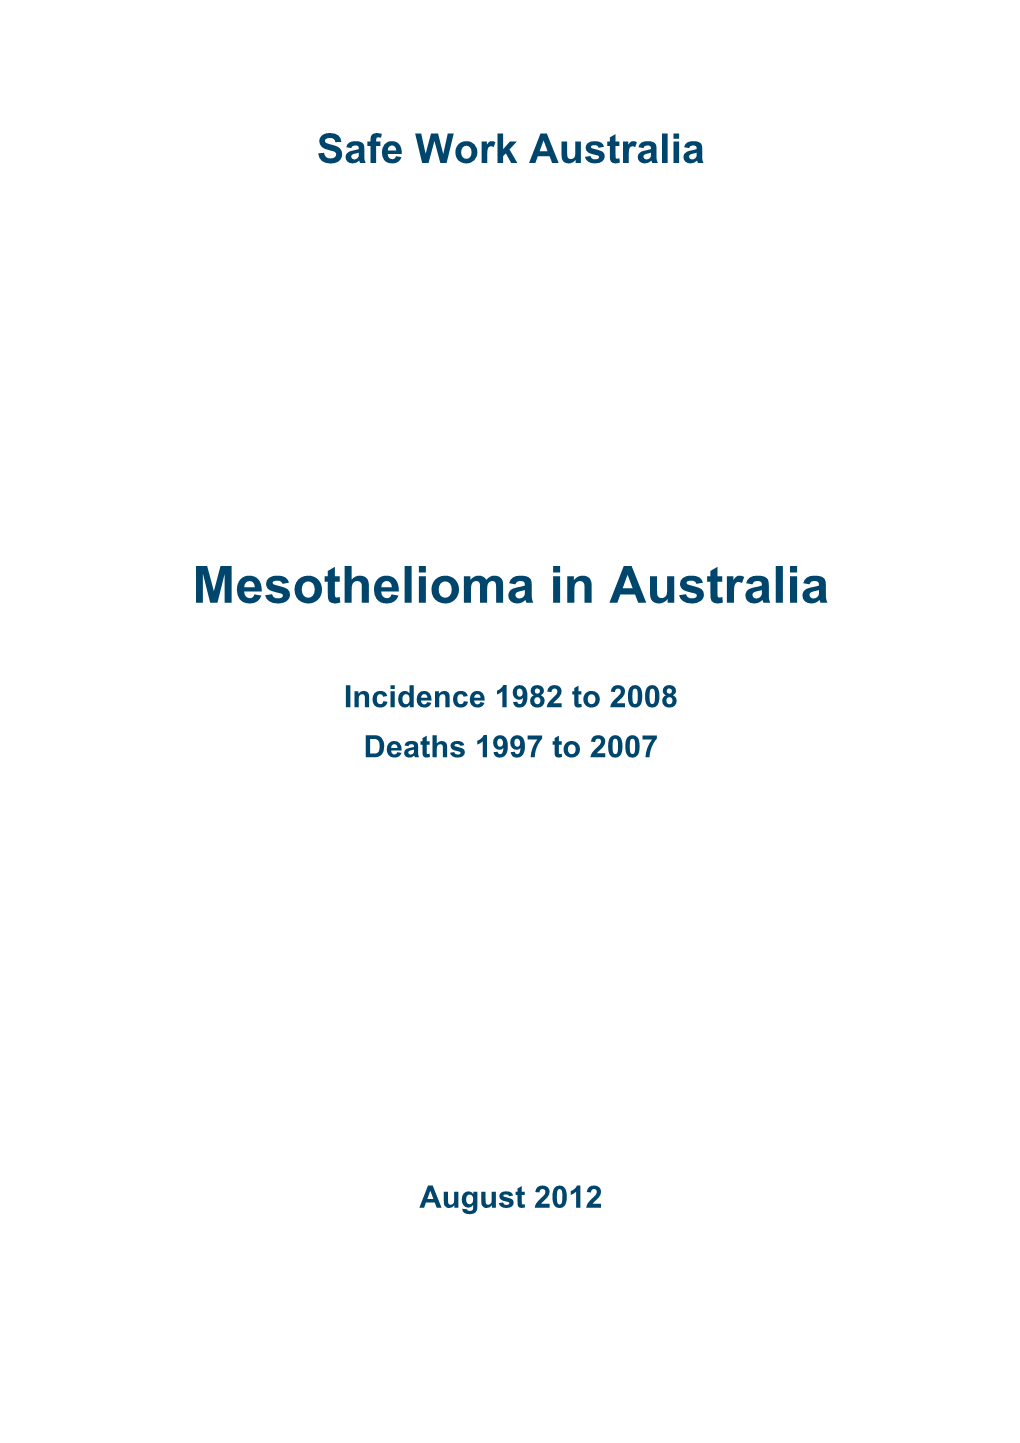 Mesothelioma in Australia Incidence 1982 to 2008 Mortality 1997 to 2007